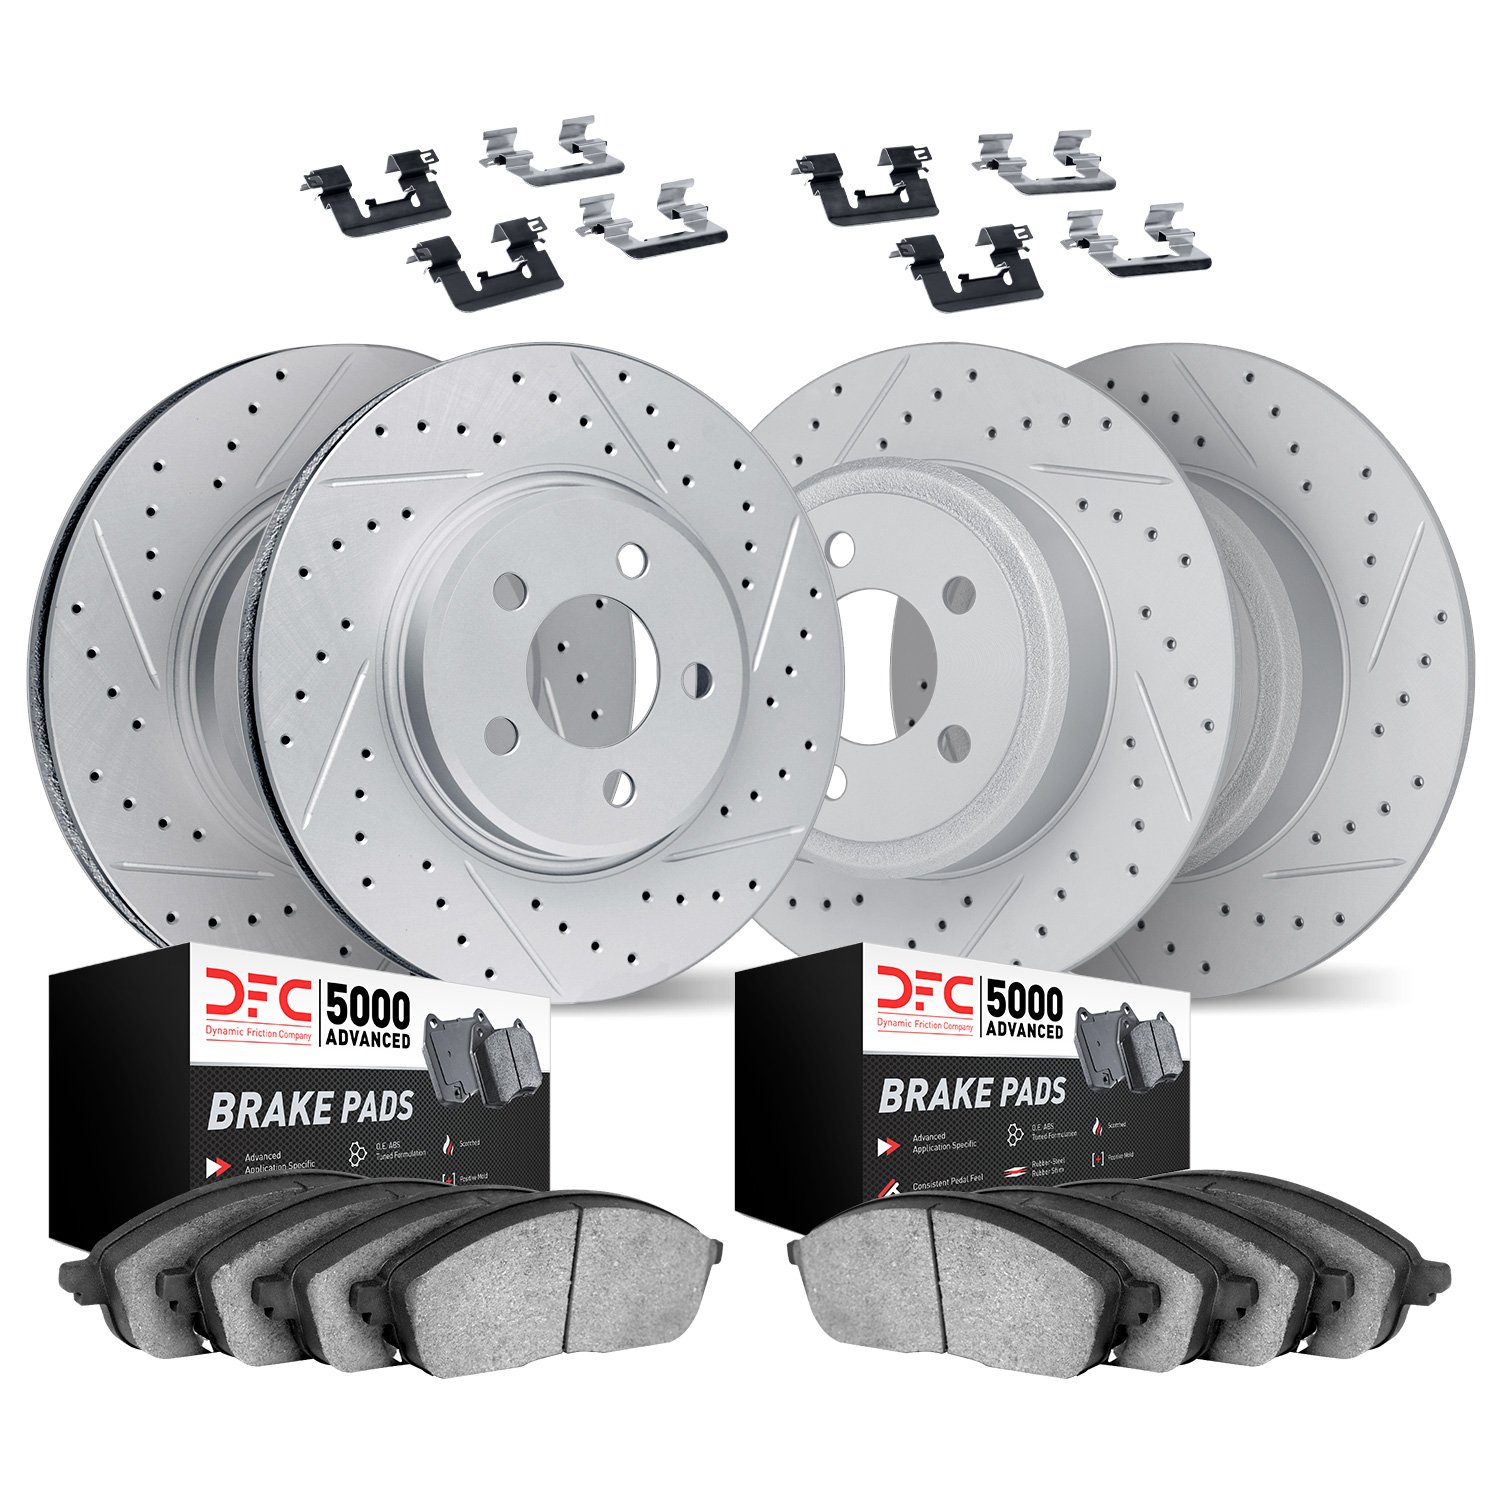 2514-54275 Geoperformance Drilled/Slotted Rotors w/5000 Advanced Brake Pads Kit & Hardware, Fits Select Ford/Lincoln/Mercury/Maz